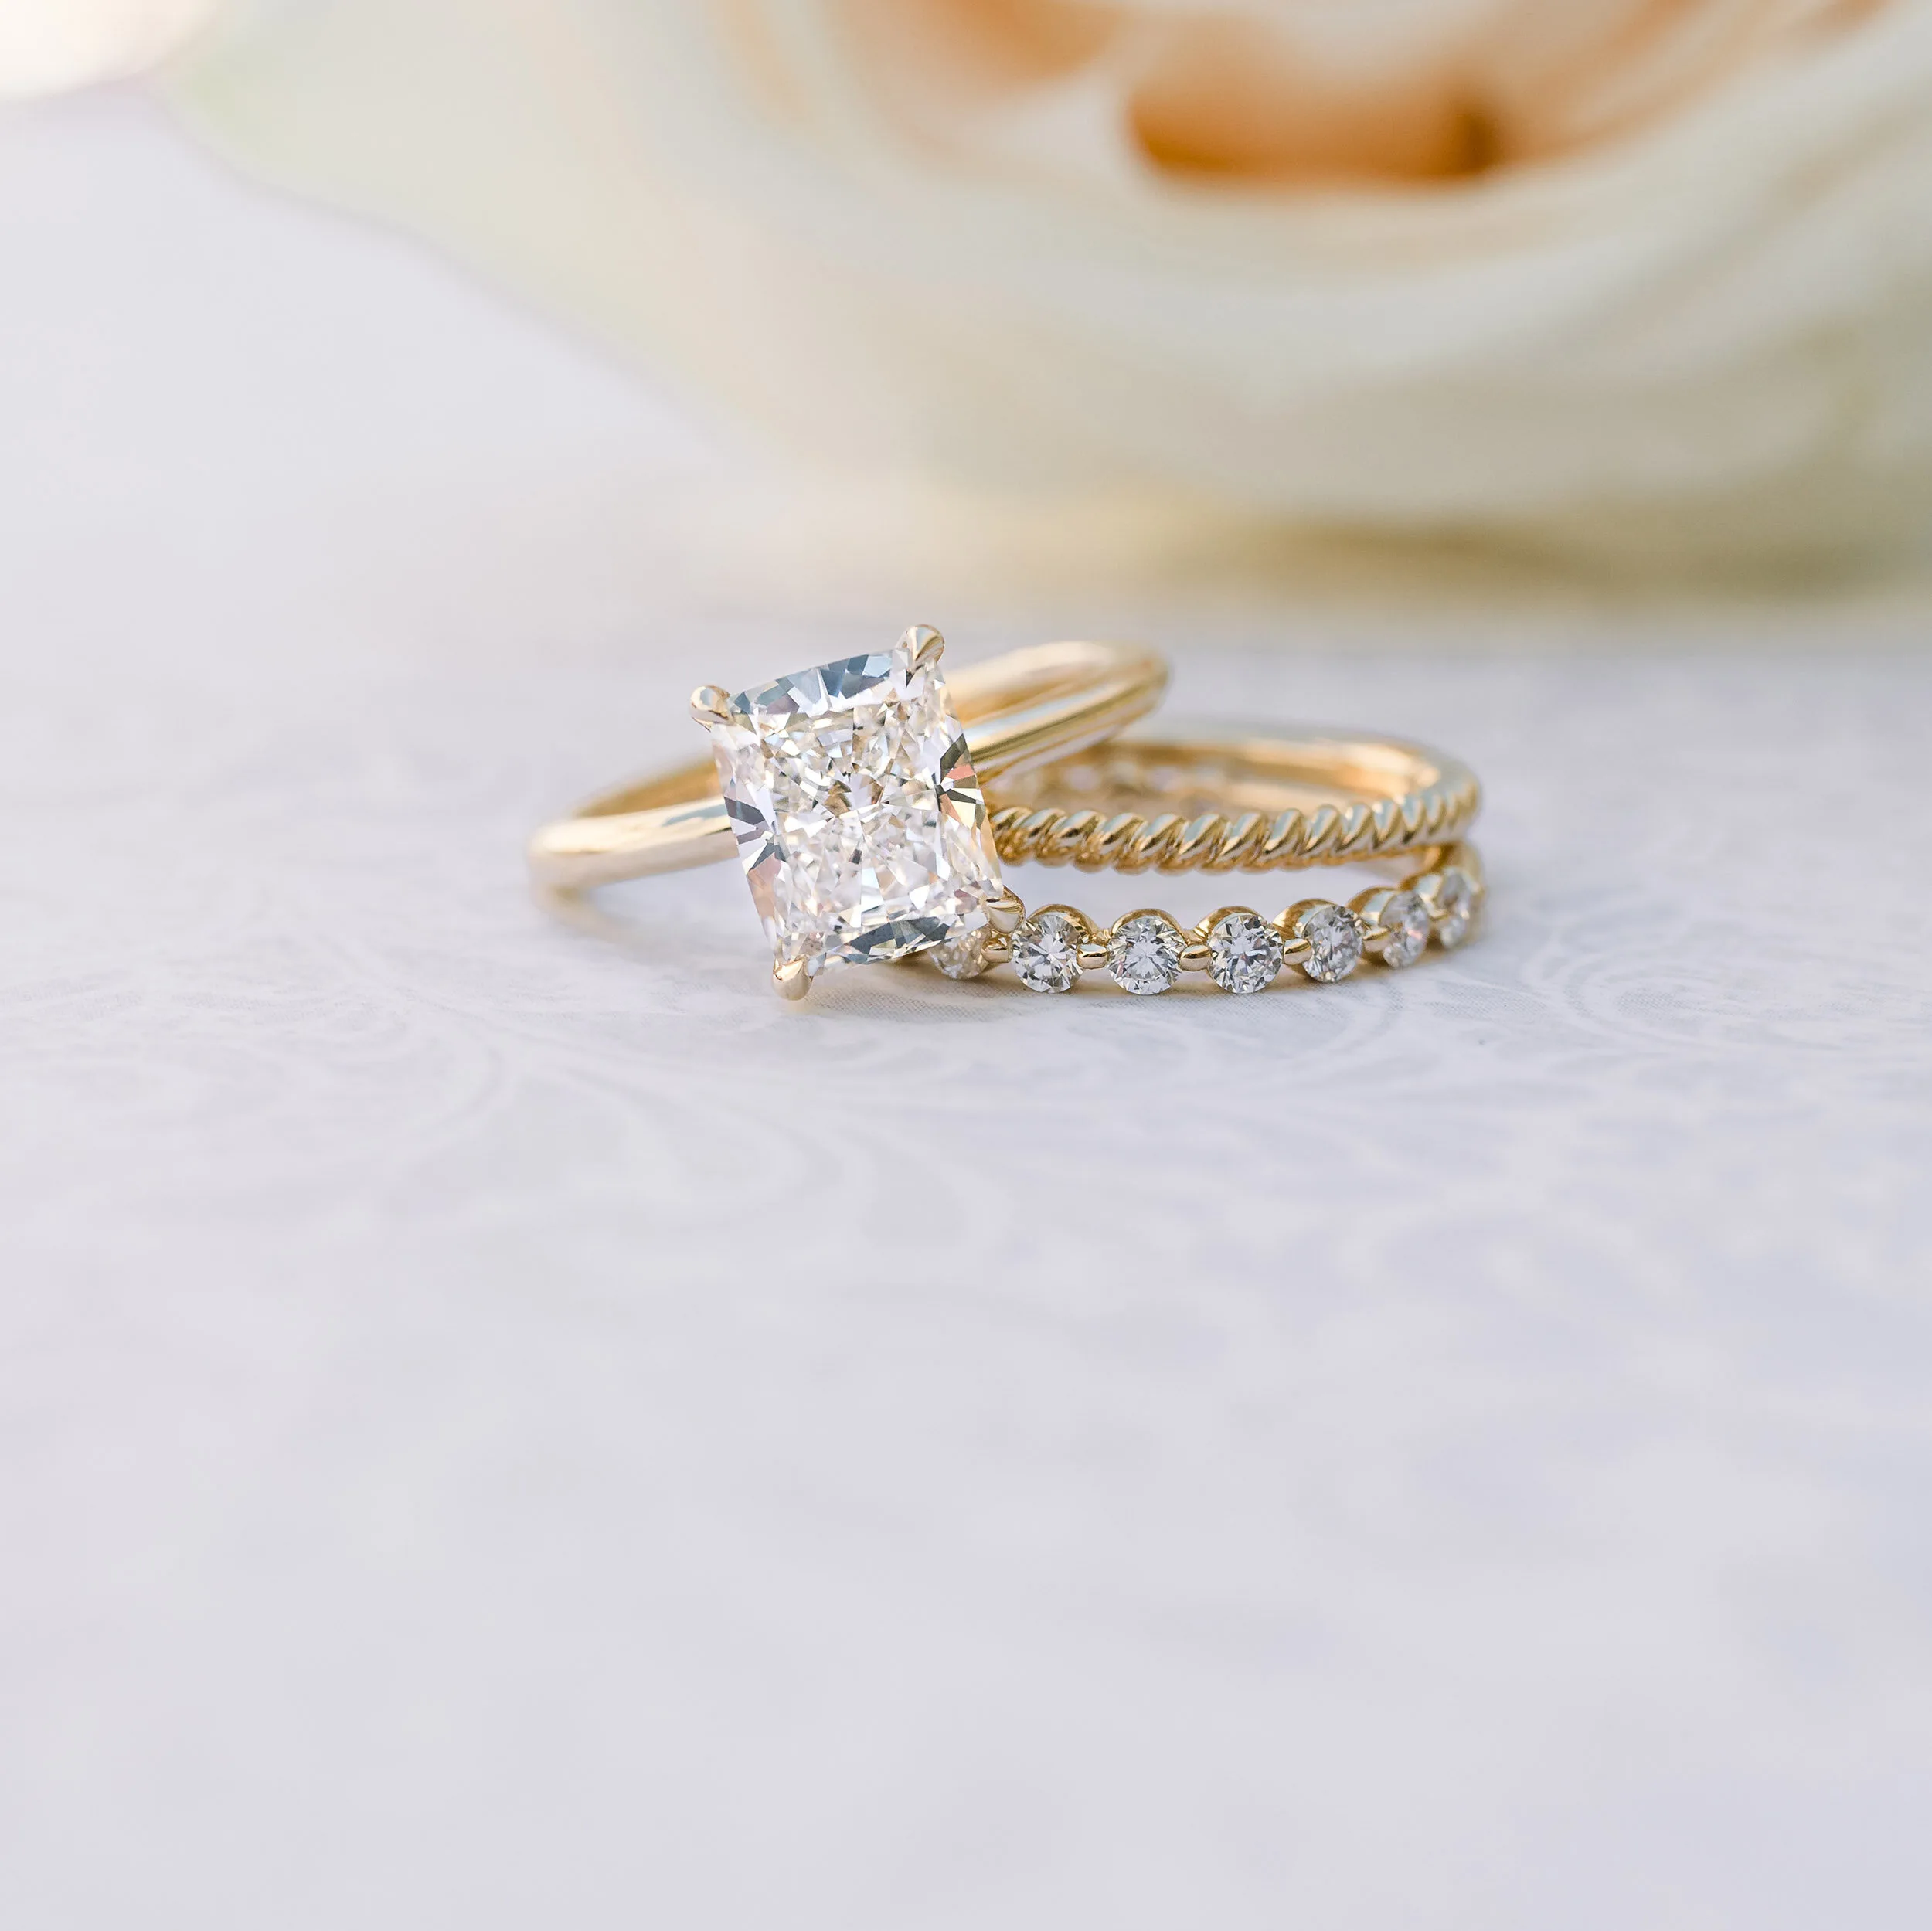 14k Yellow Gold 2.5ct Cushion Lab Diamond Solitaire Engagement Ring wtih Custom Shared Prong Lab Diamond Wedding Band and Rope Wedding Band Ada Diamonds Design AD-221 AD-261 AD-262 macro